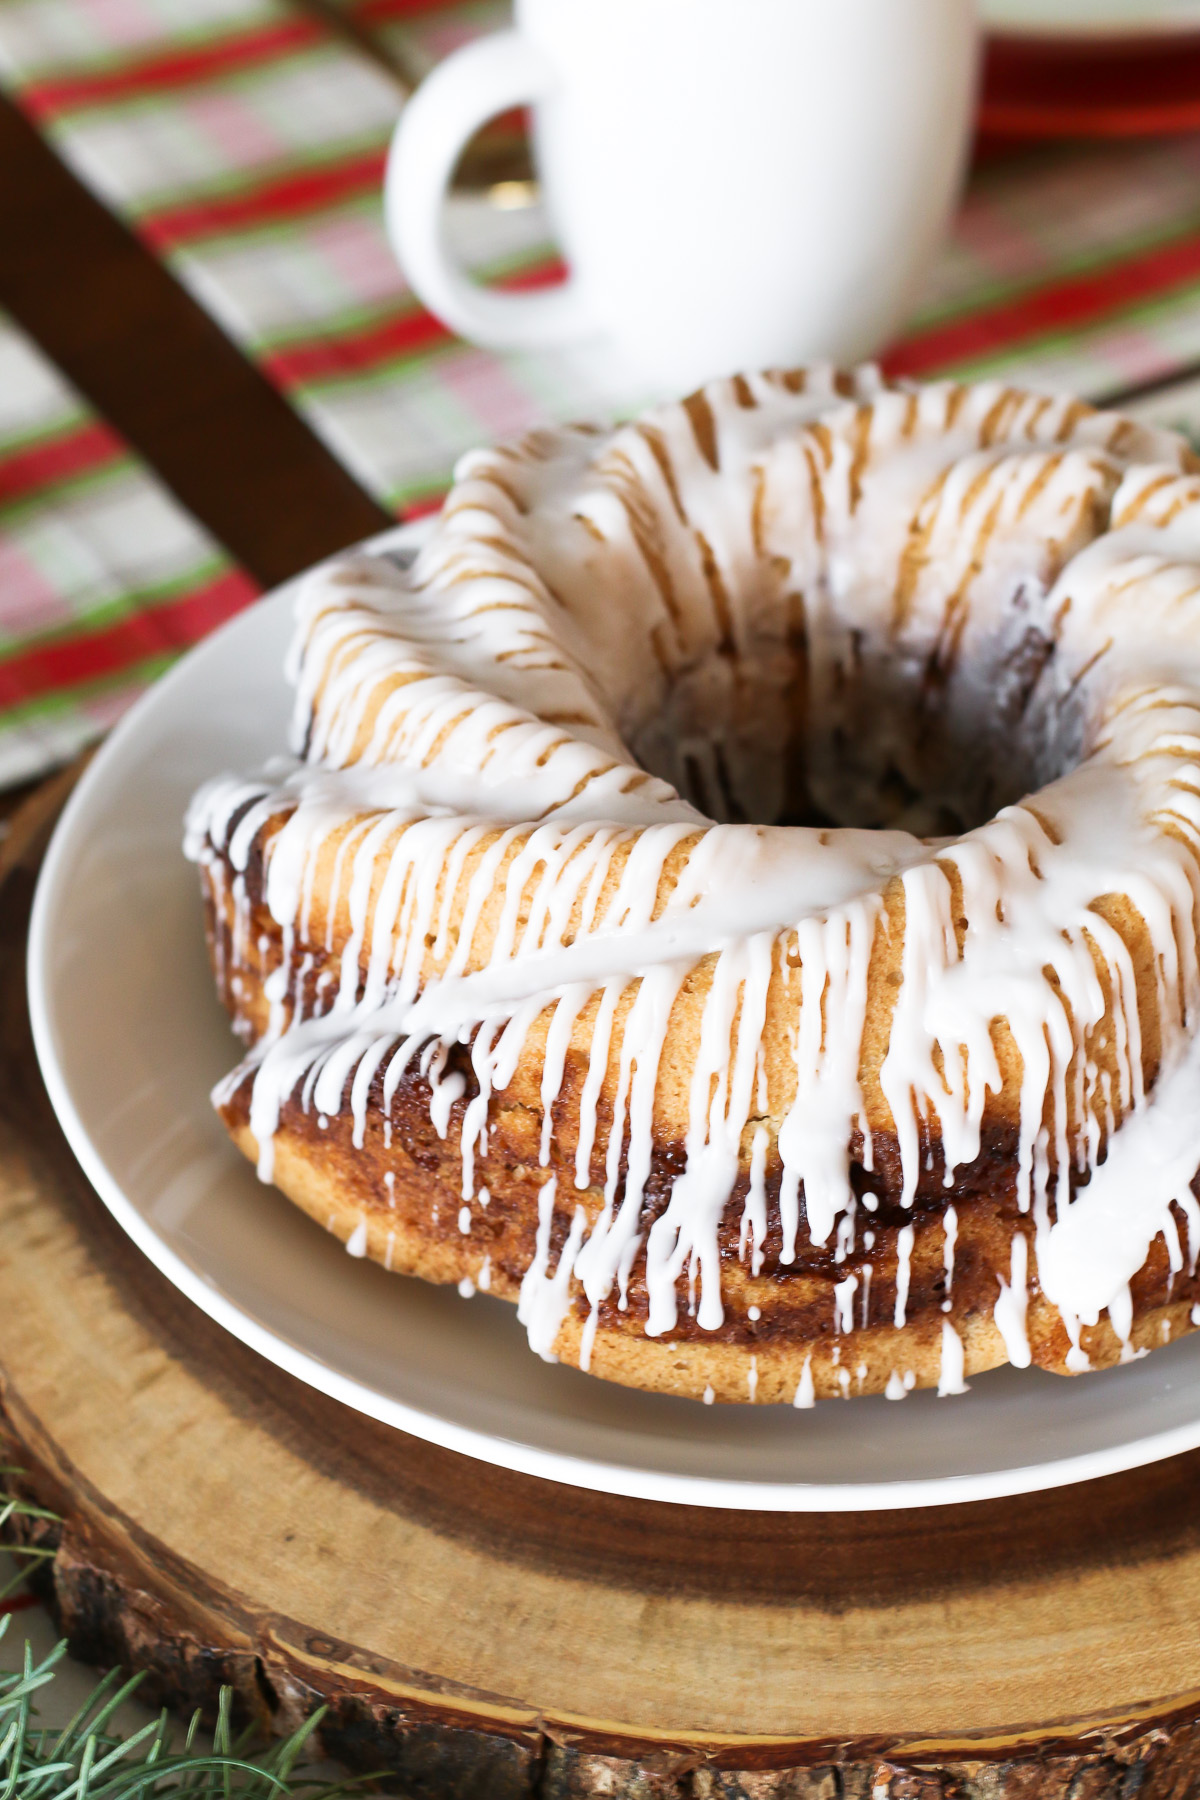 Gluten Free Vegan Cinnamon Roll Coffee Cake. Layers of light vanilla cake and cinnamon sugar, baked to perfection. That simple glaze is a total must!